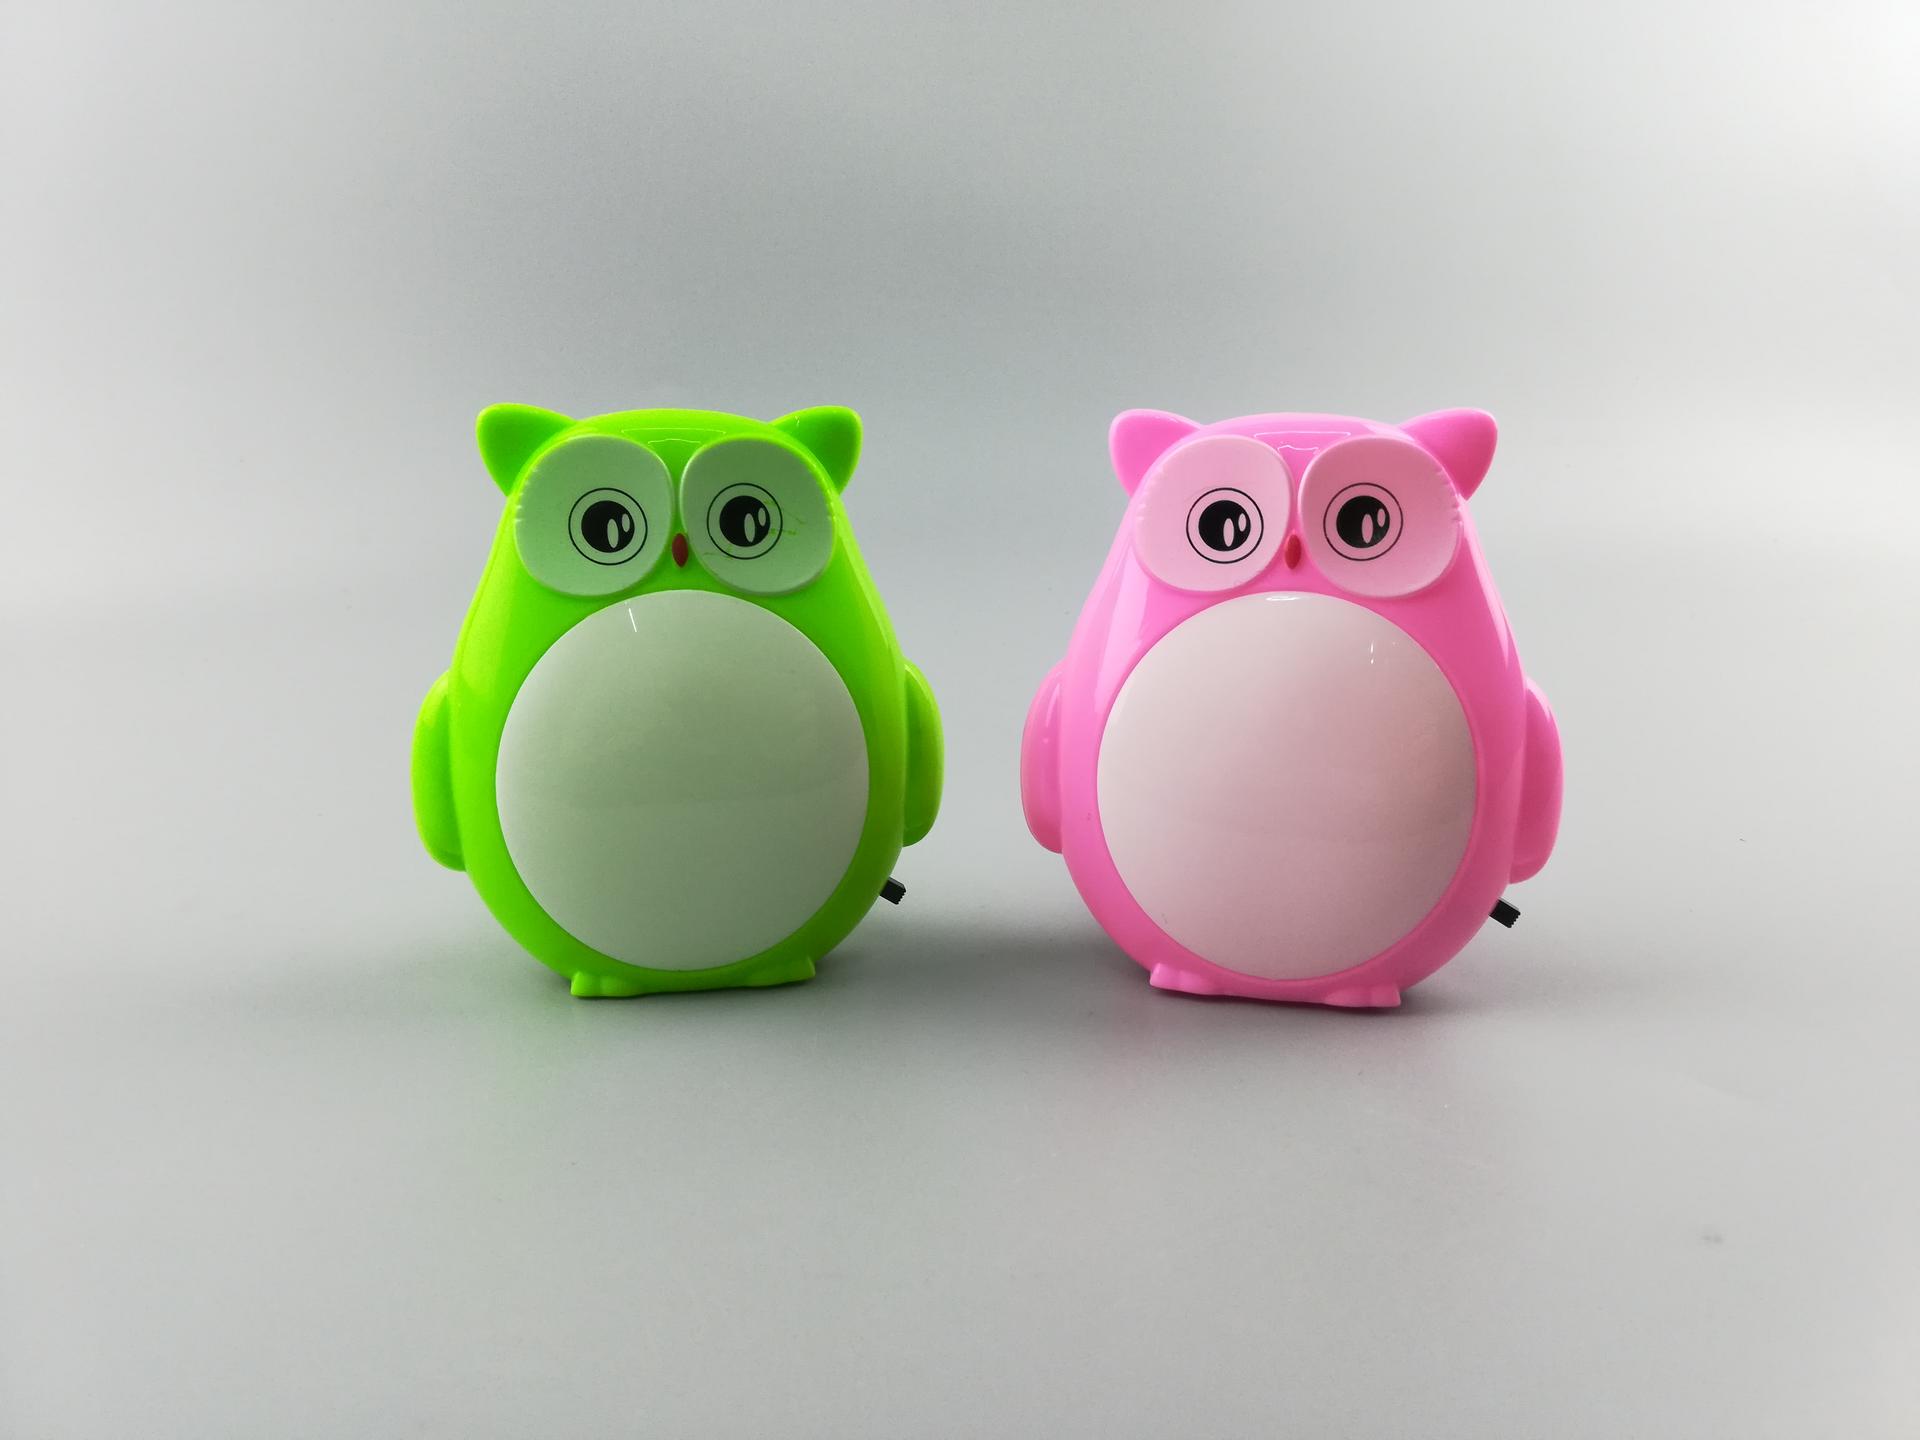 W004 Helloween owl lamp switch plug in led night light For Baby Bedroom holiday gift for children